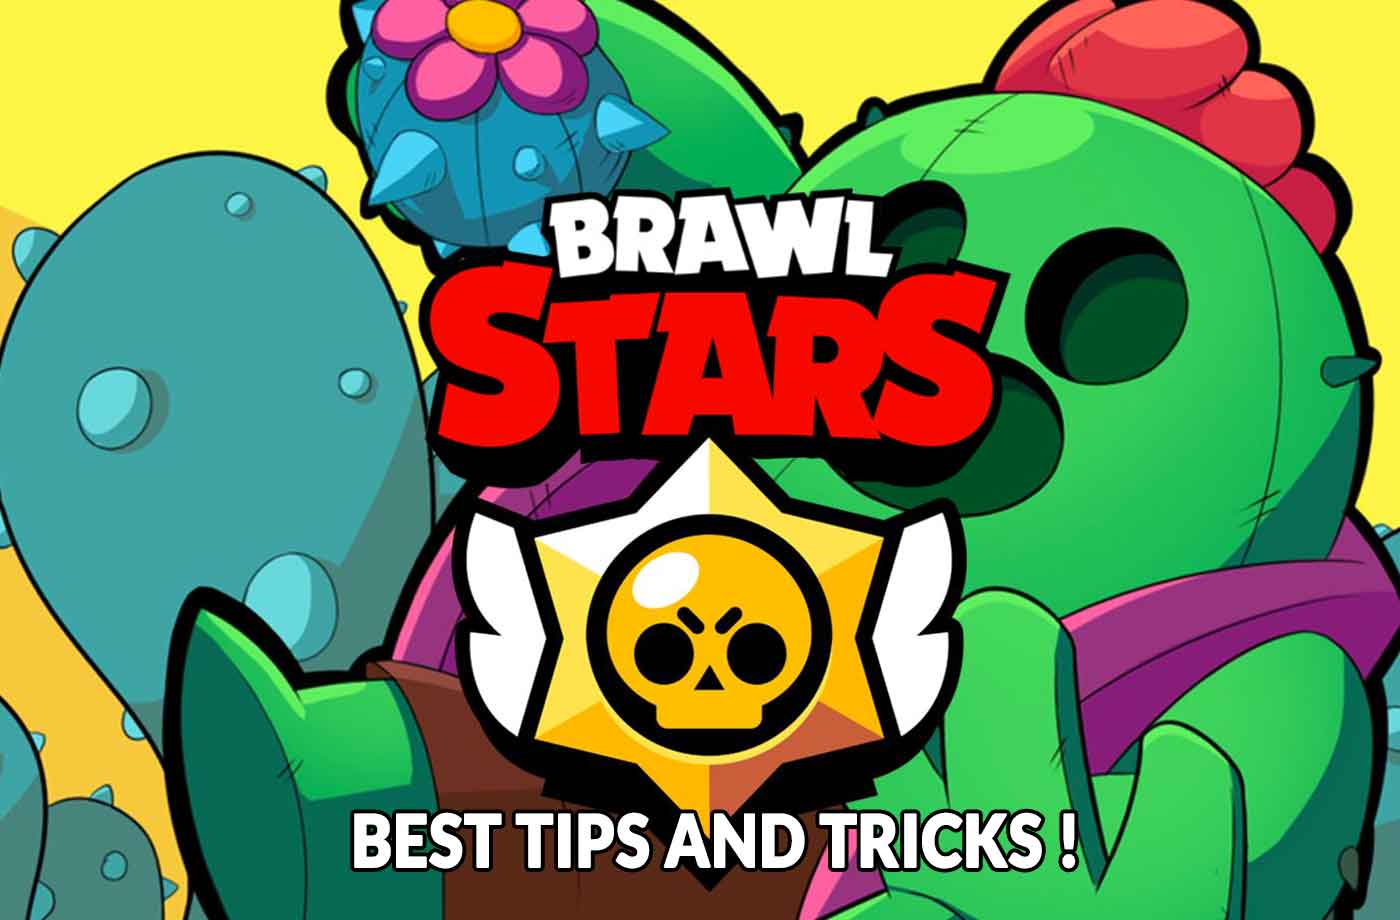 Guide Brawl Stars Tips And Hints To Understand The New Game Of Supercell Kill The Game - 2 players 1 console brawl stars